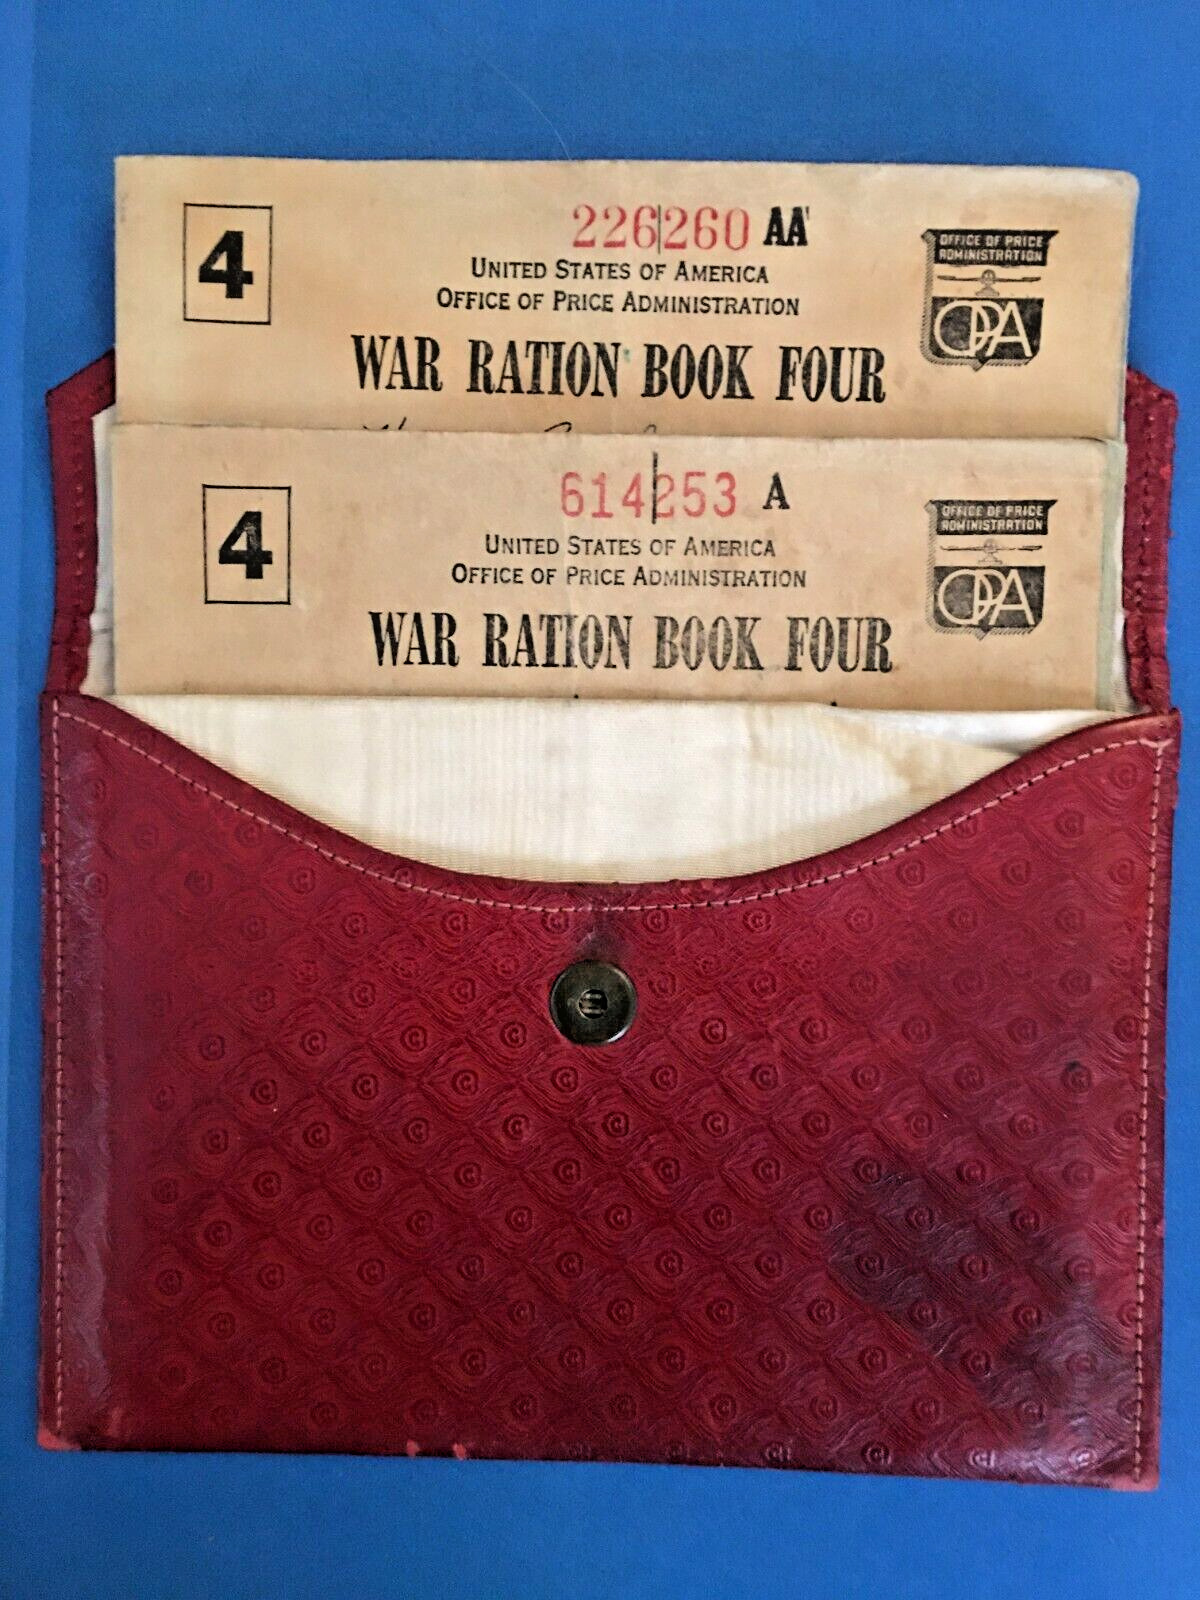 Vintage World War II Ration Books Stamps Plus Tooled Leather Pouch  Silk Lined